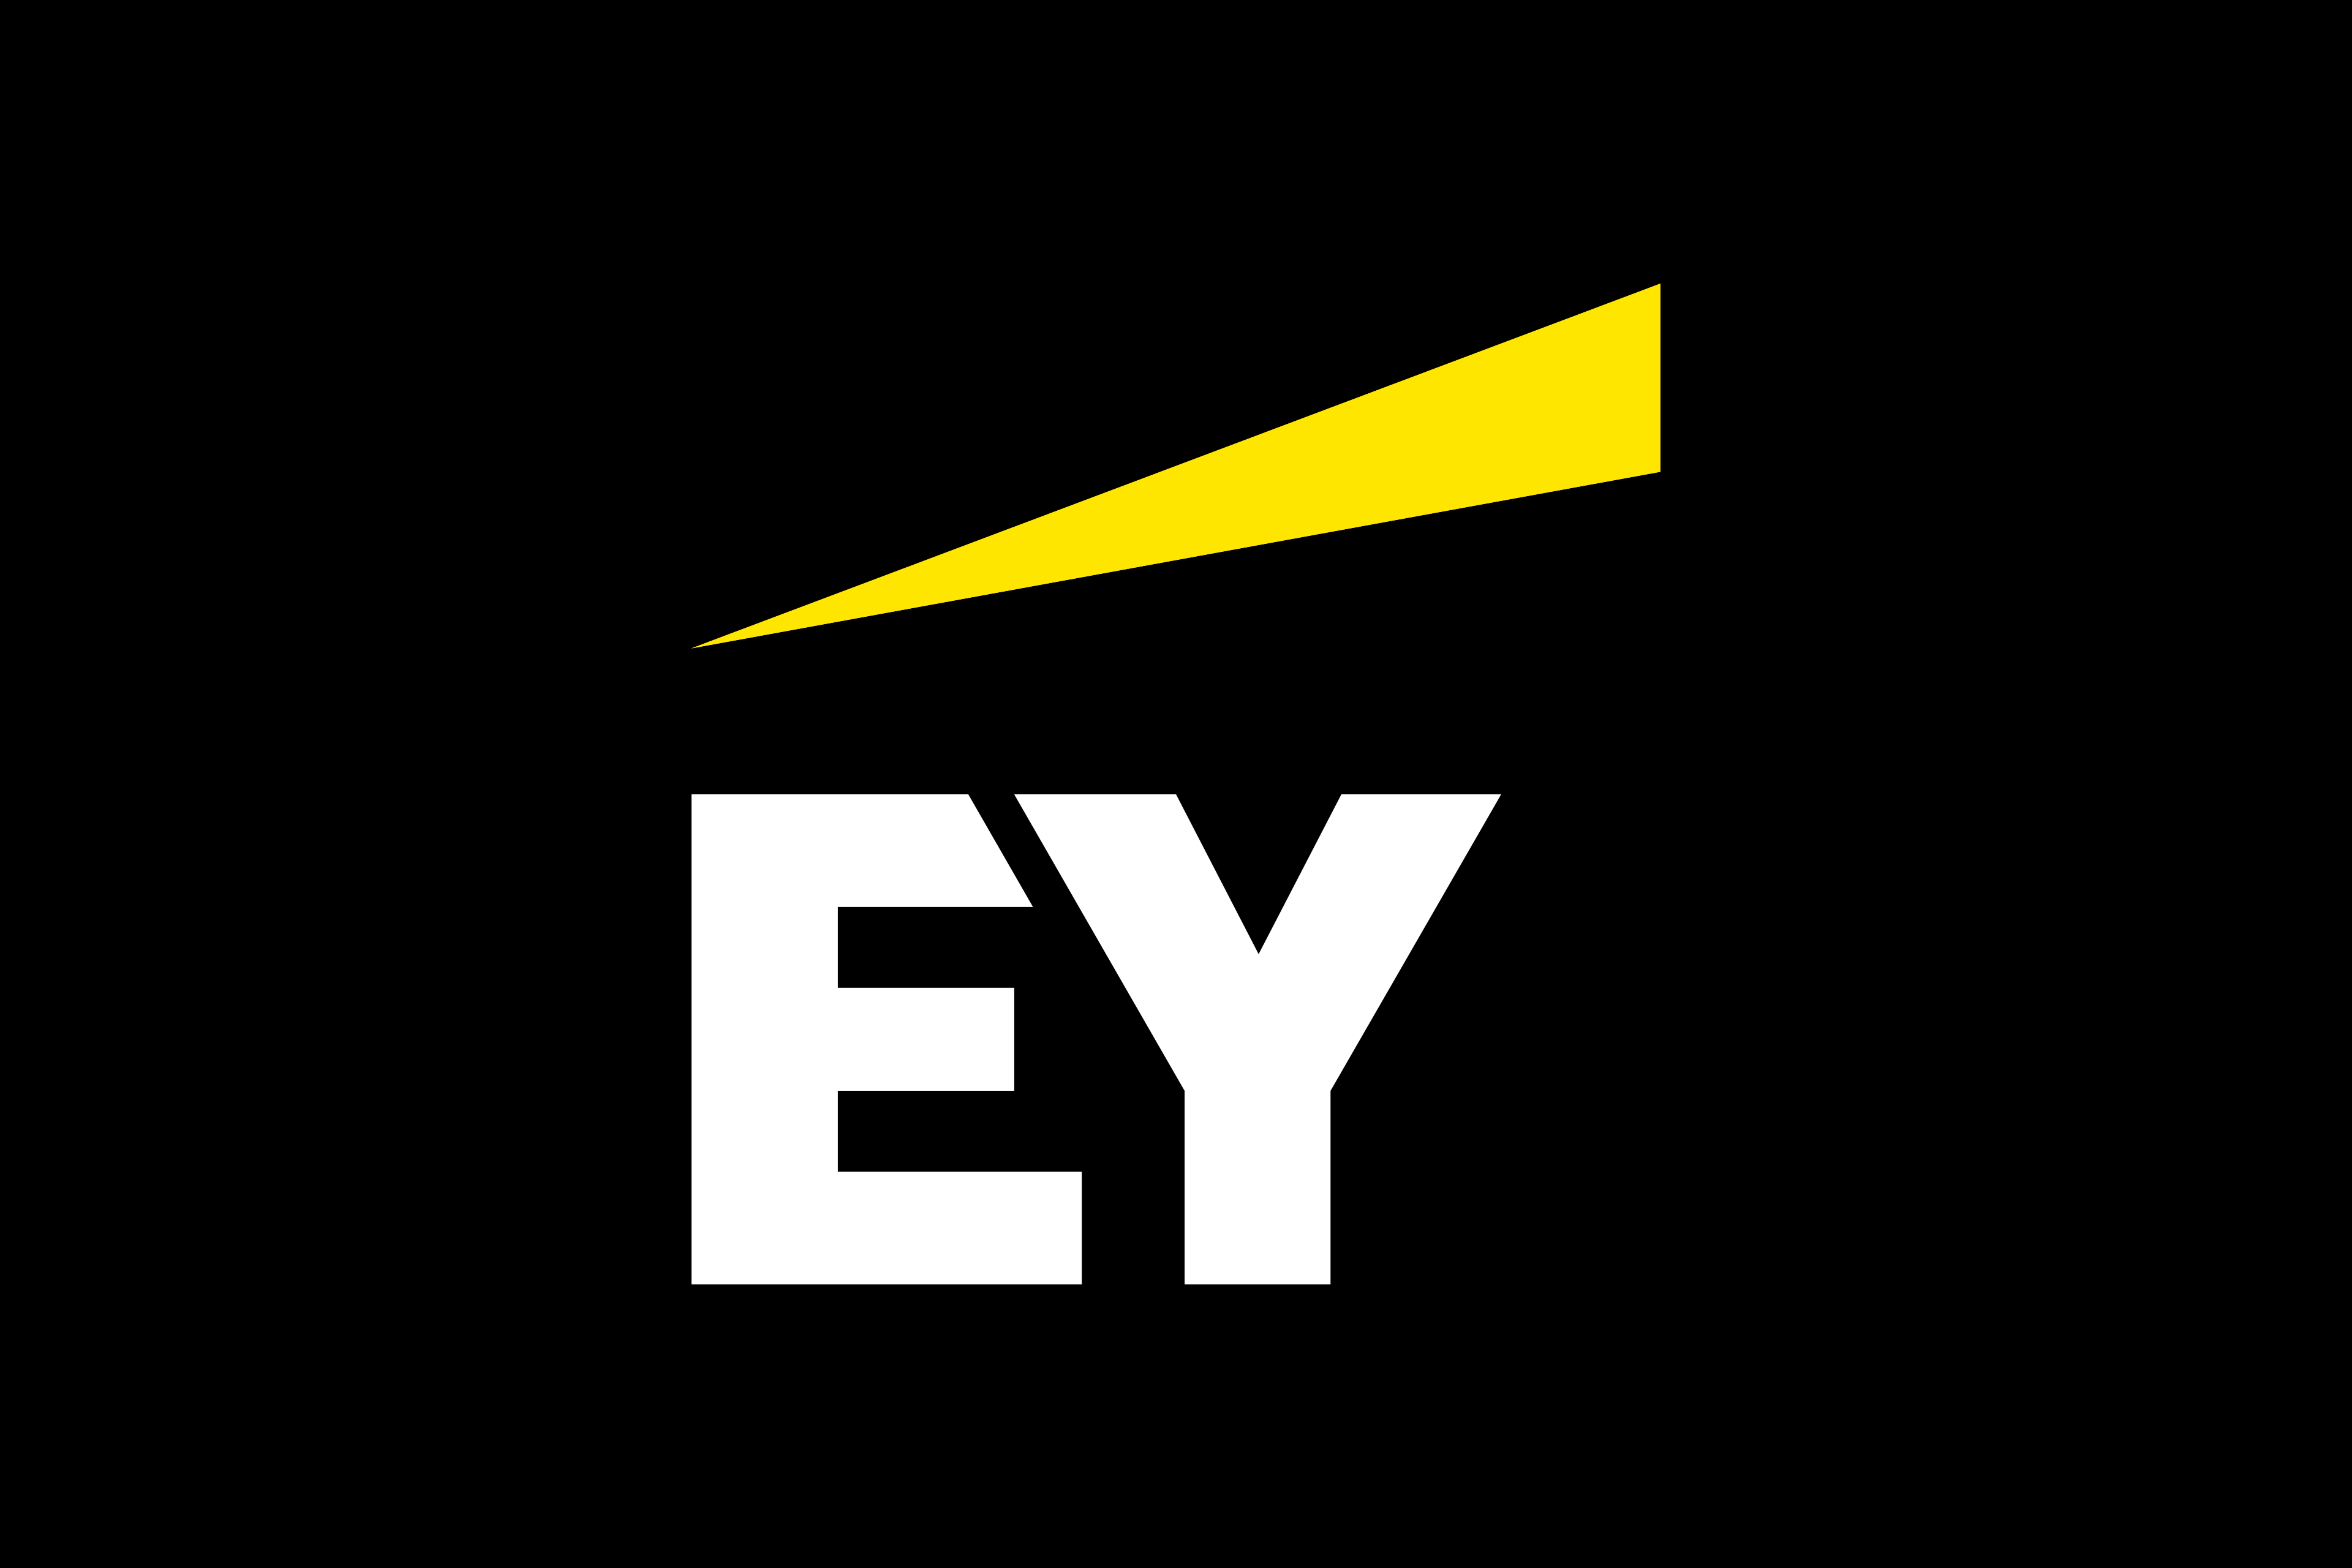 Consulting Giant EY to be Carbon Neutral by End of Year, Expand Sustainability Strategy